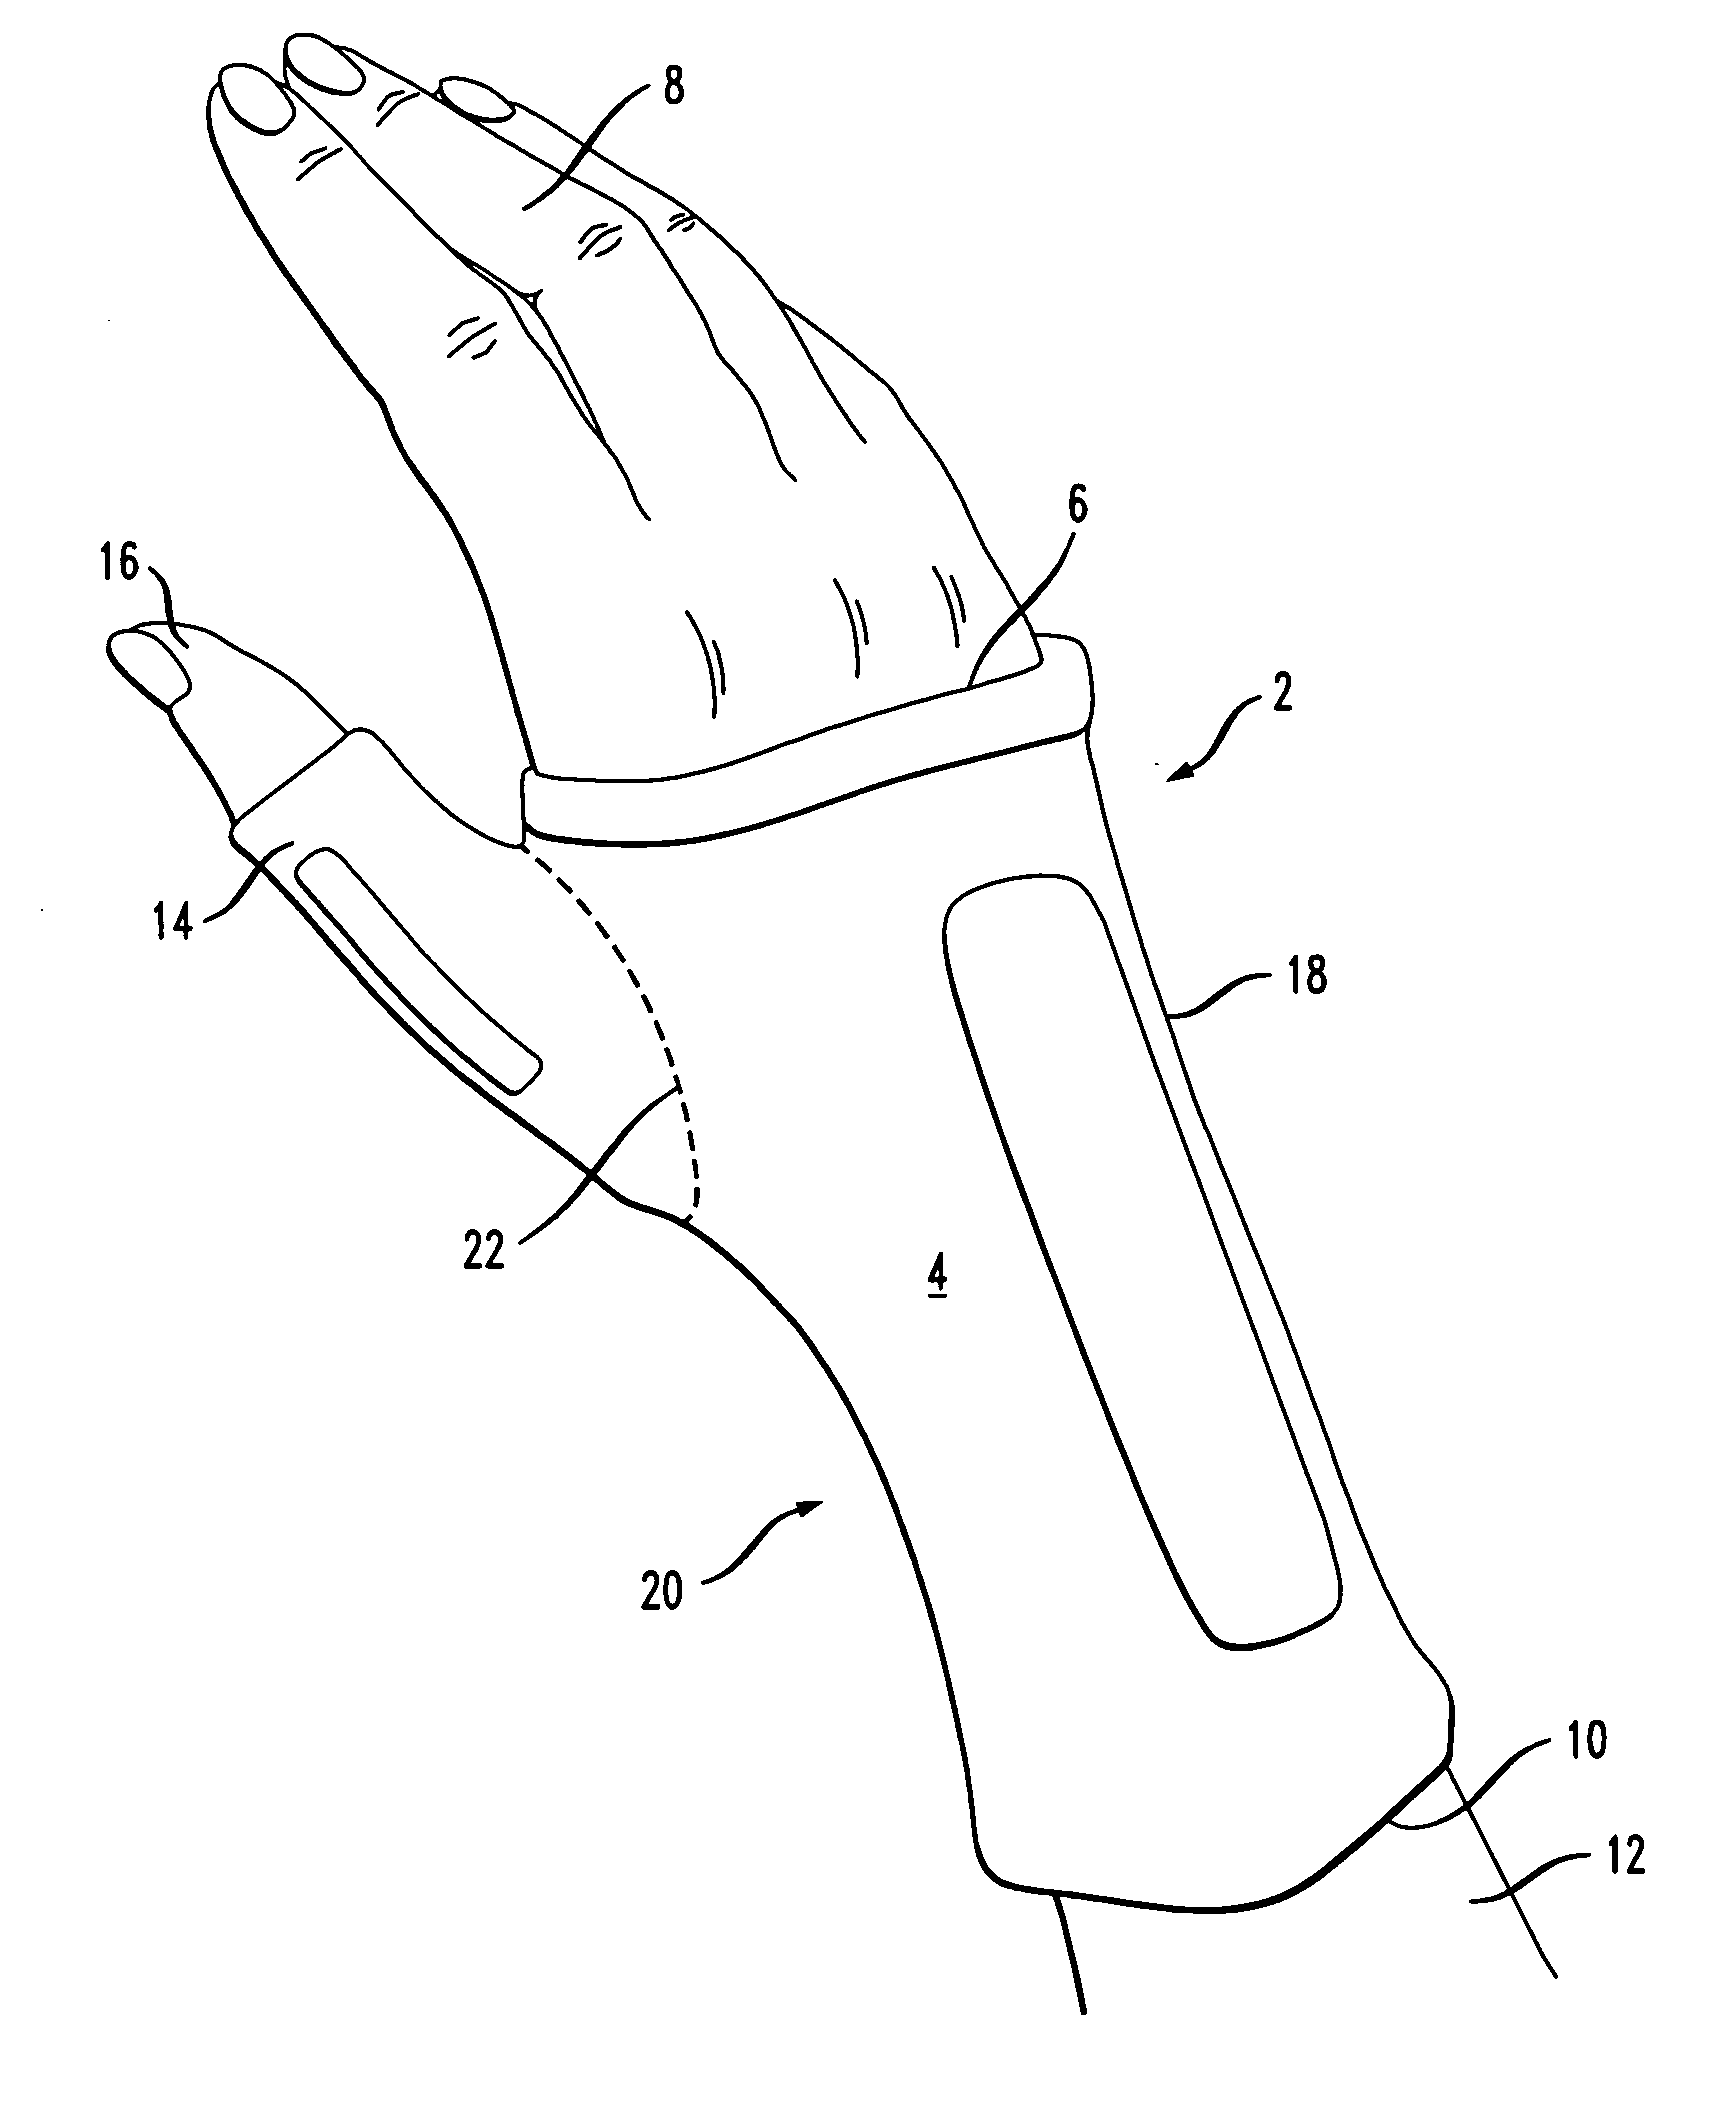 Reversible wrist and thumb support